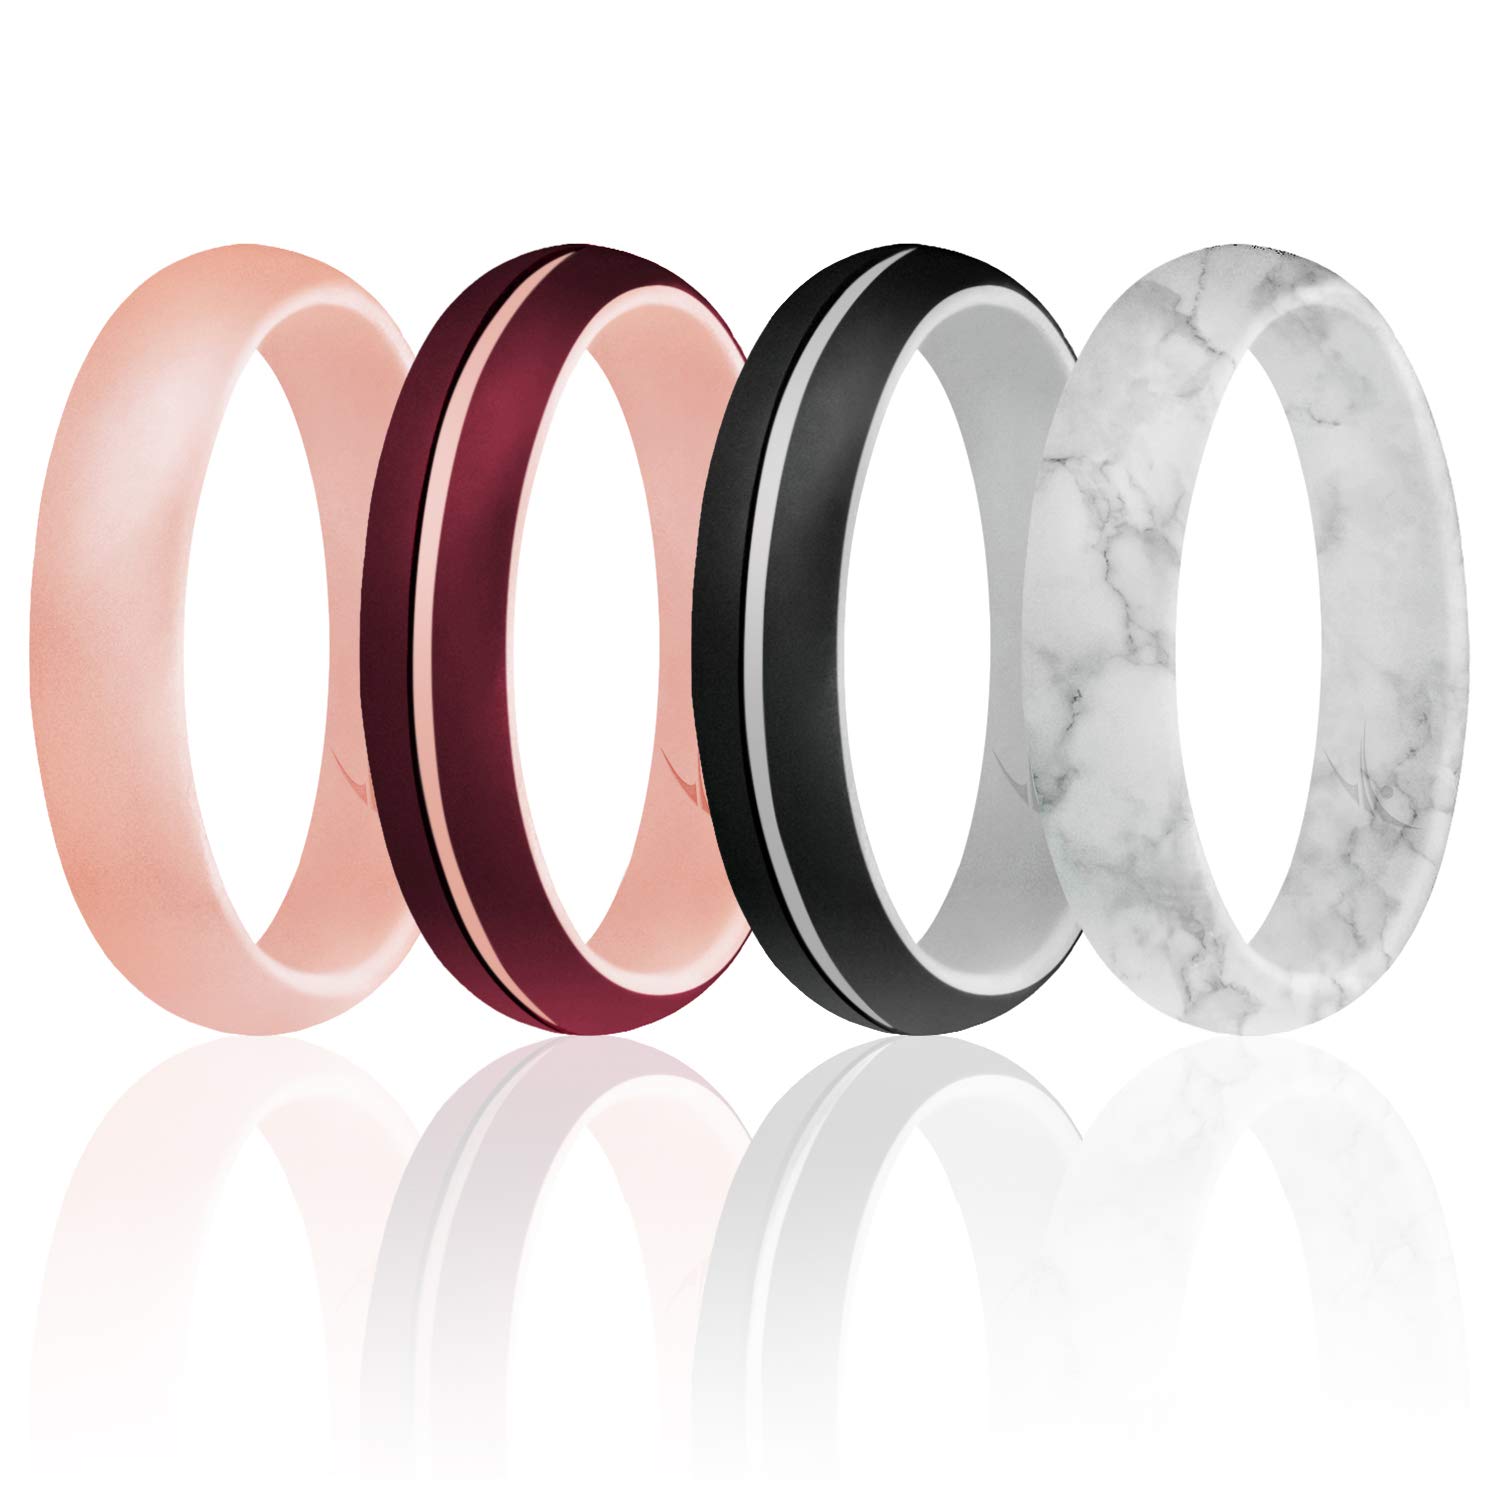 ROQ Silicone Rubber Wedding Ring for Women, Thin Stackable Rubber Silicone Wedding Band, Bridal Jewelry Set, Anniversary Rings, 